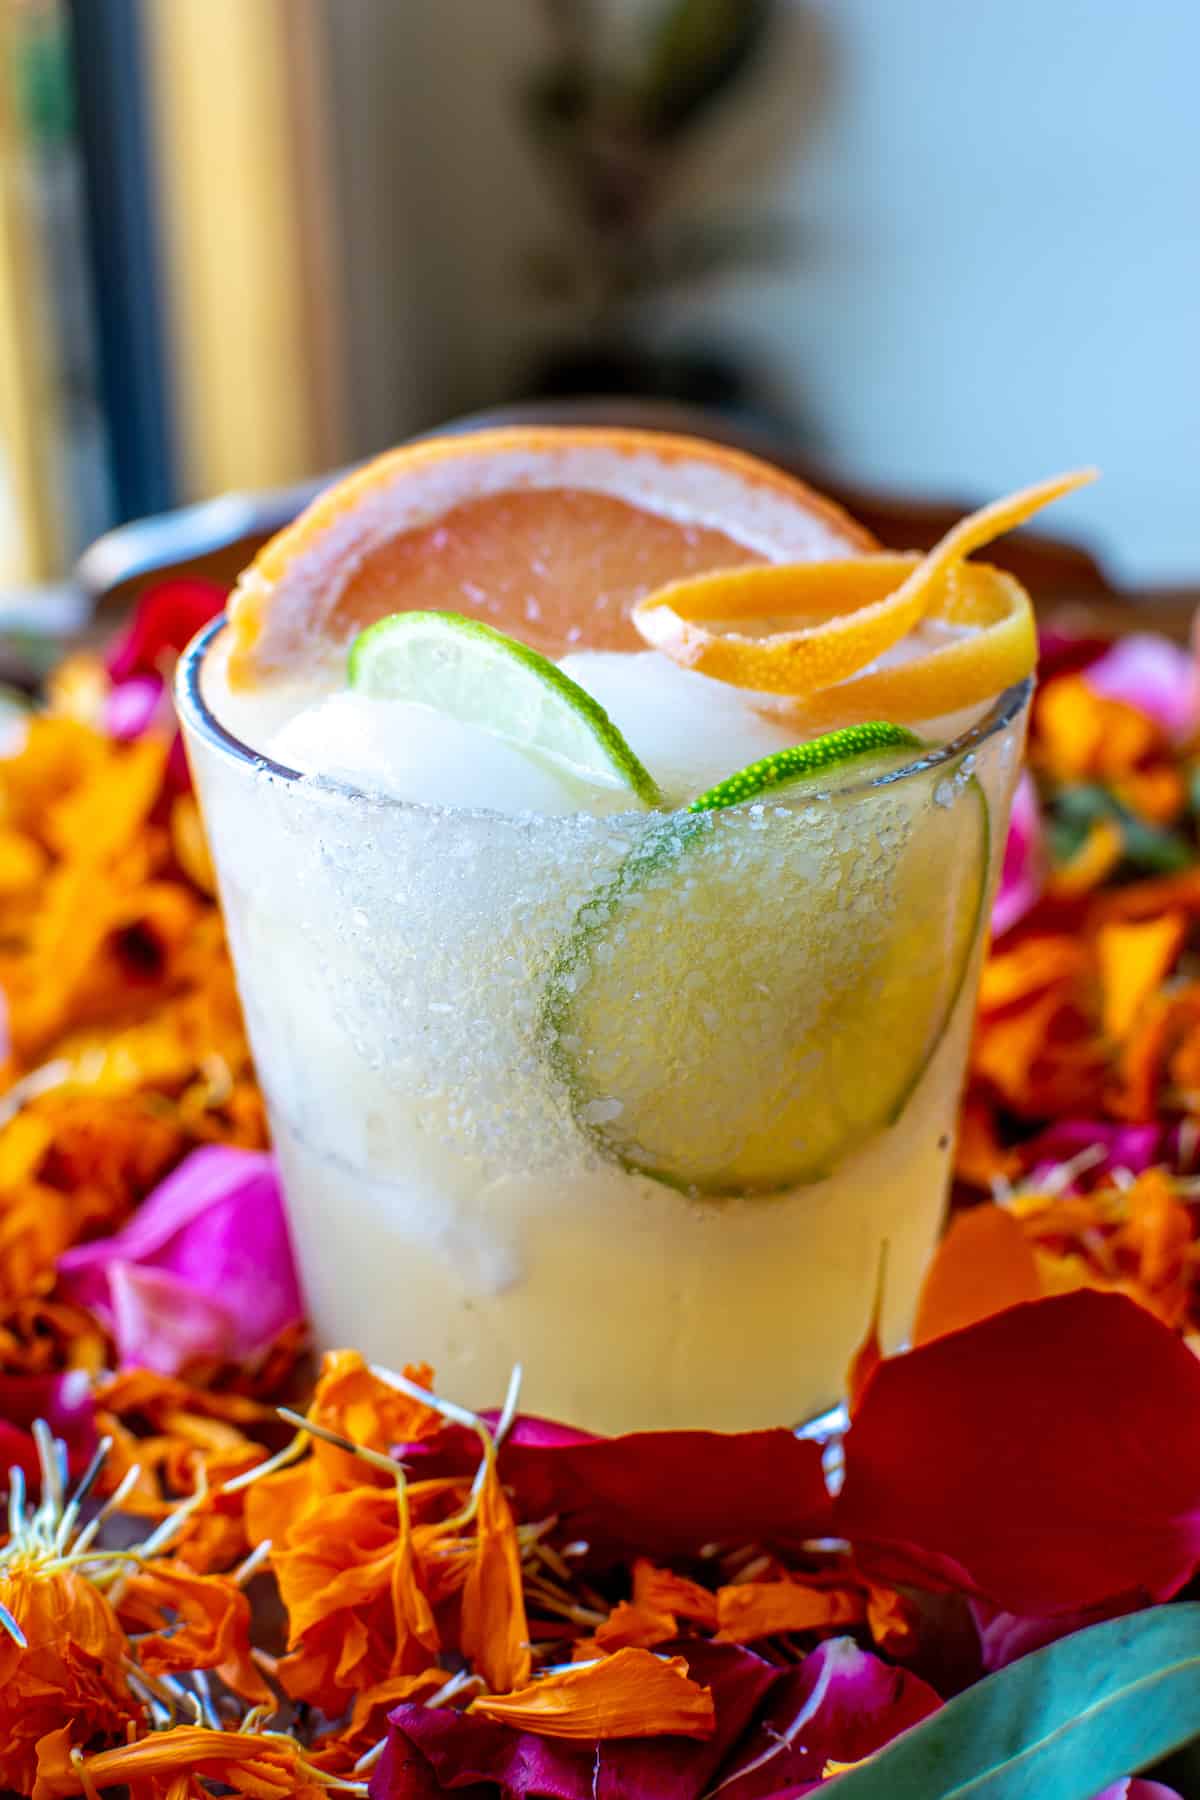 A honey grapefruit margarita sitting on a bed of flower petals with a salt and sugar rimmed glass, a couple slices of lime, and a wedge of grapefruit for garnish.